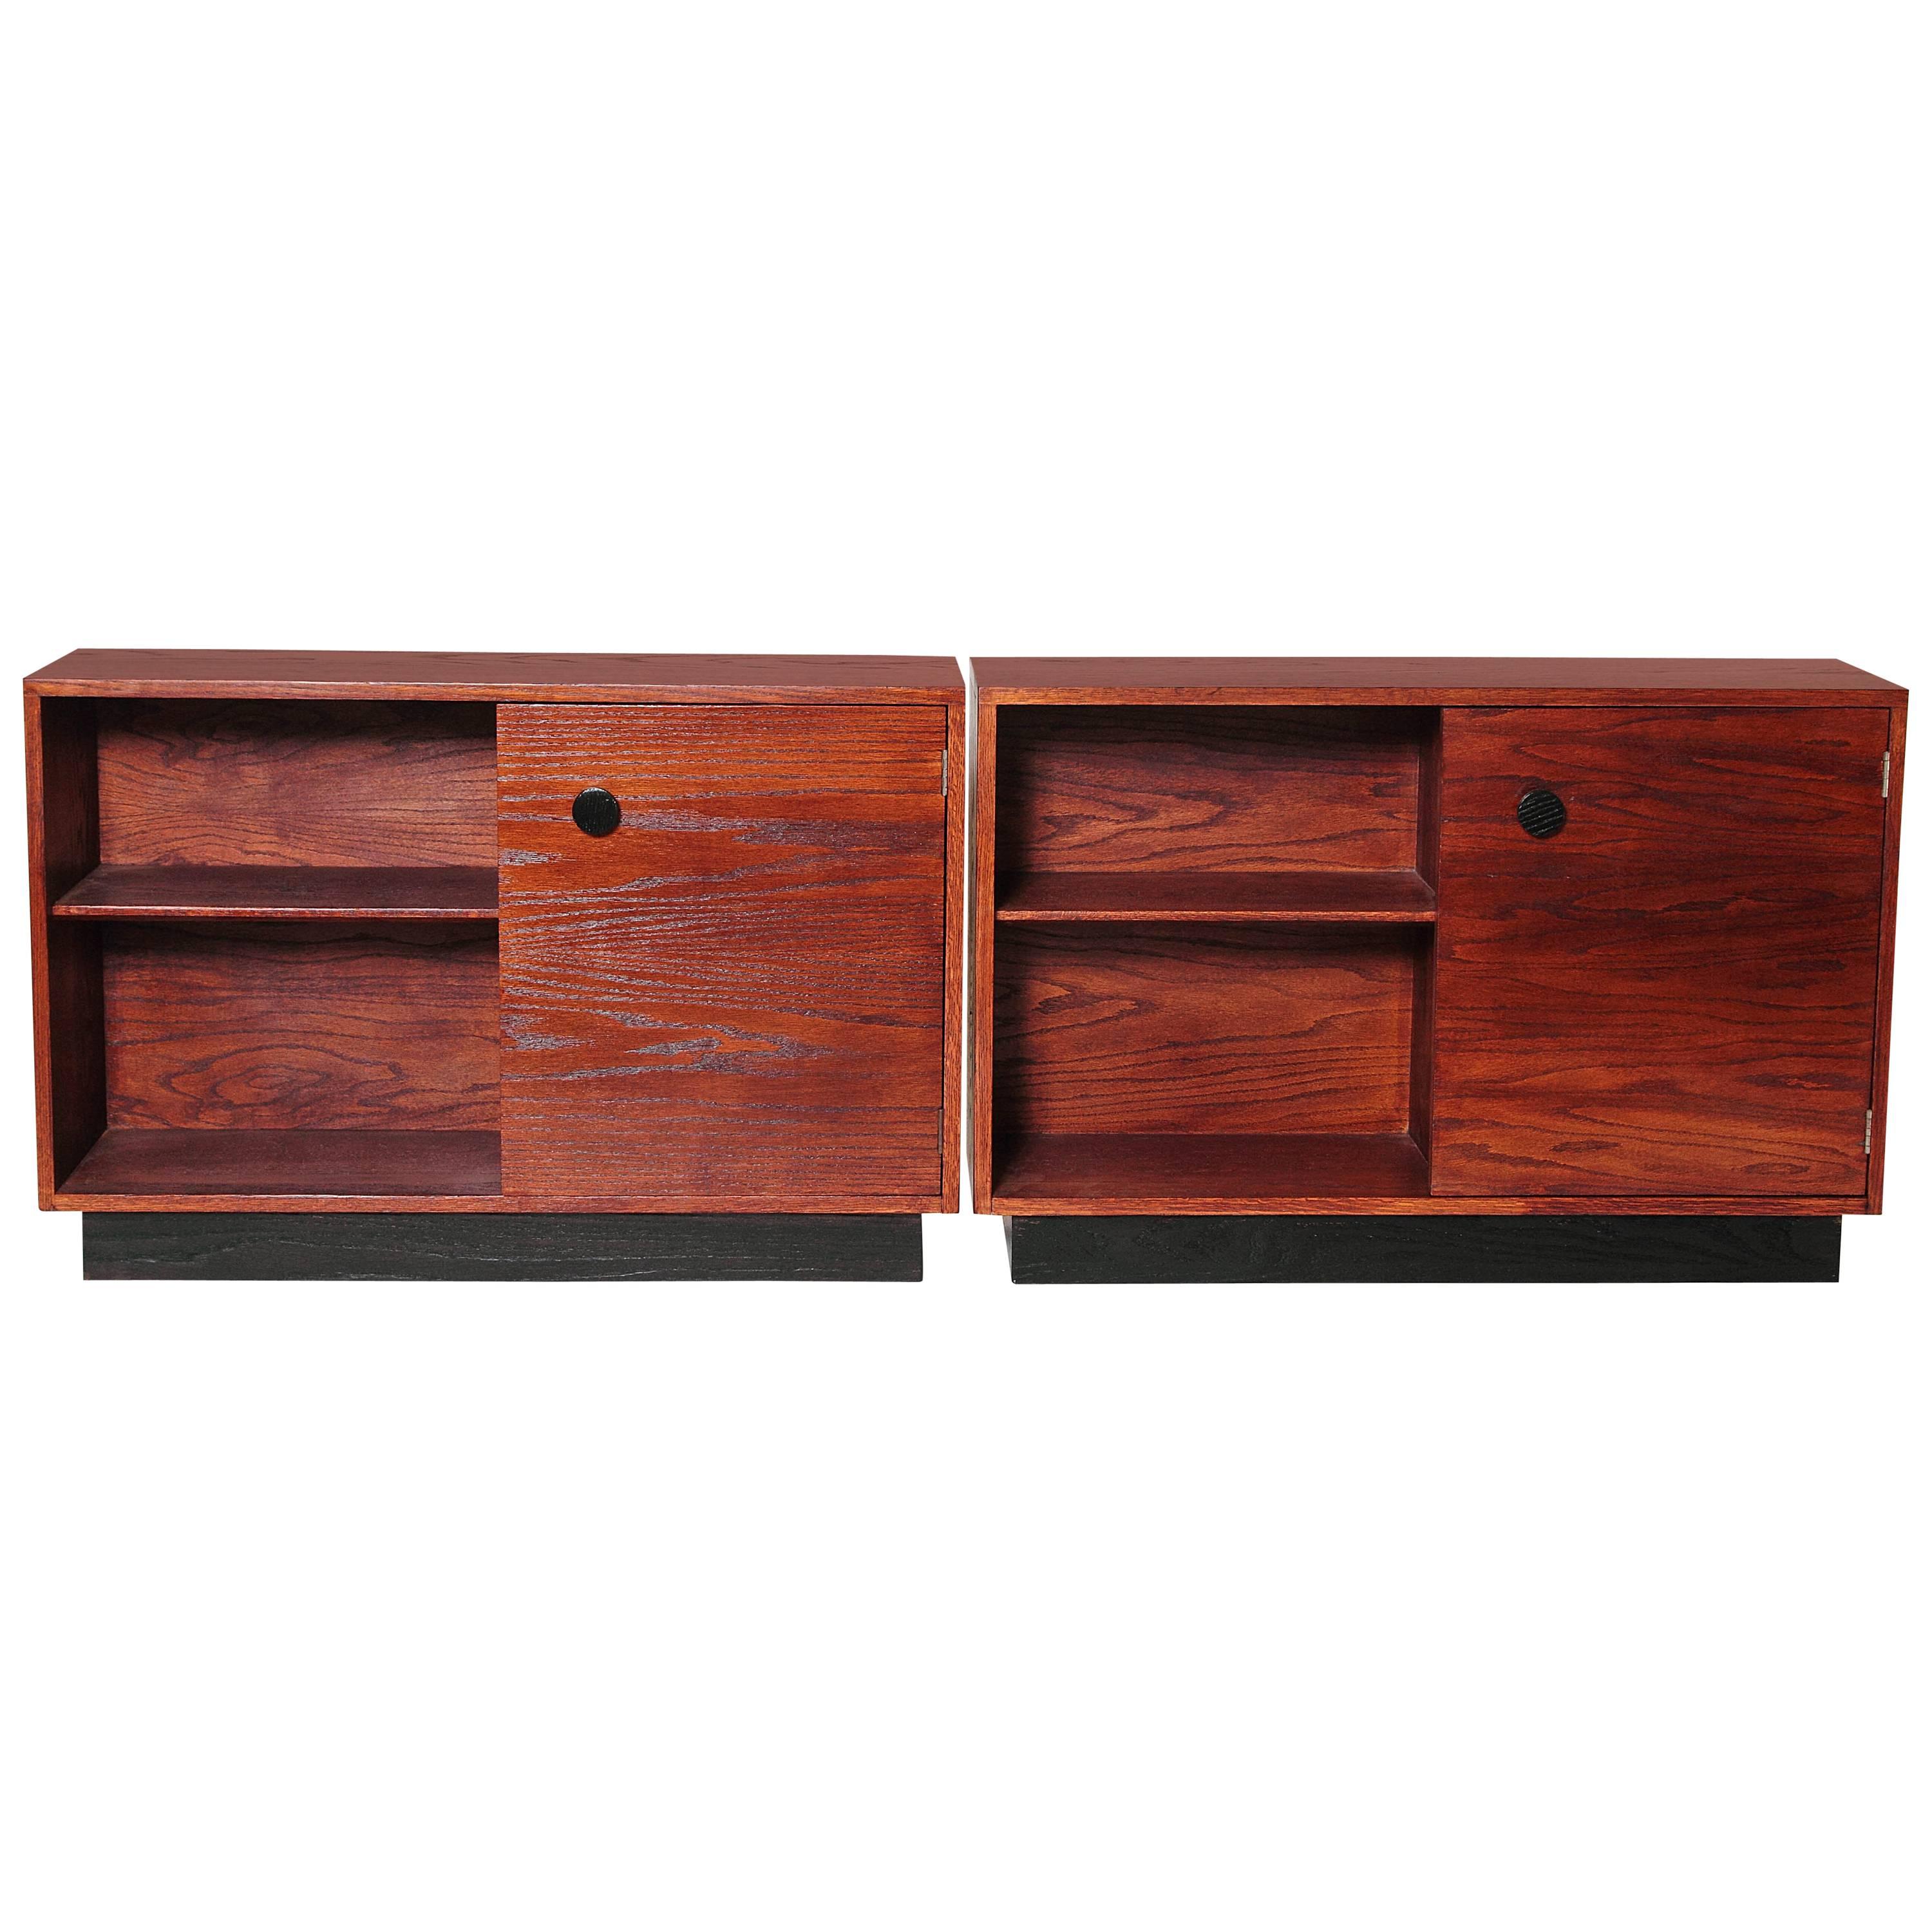 Machine Age Art Deco Gilbert Rohde Signed Smart Set Pair Cabinets for Kroehler